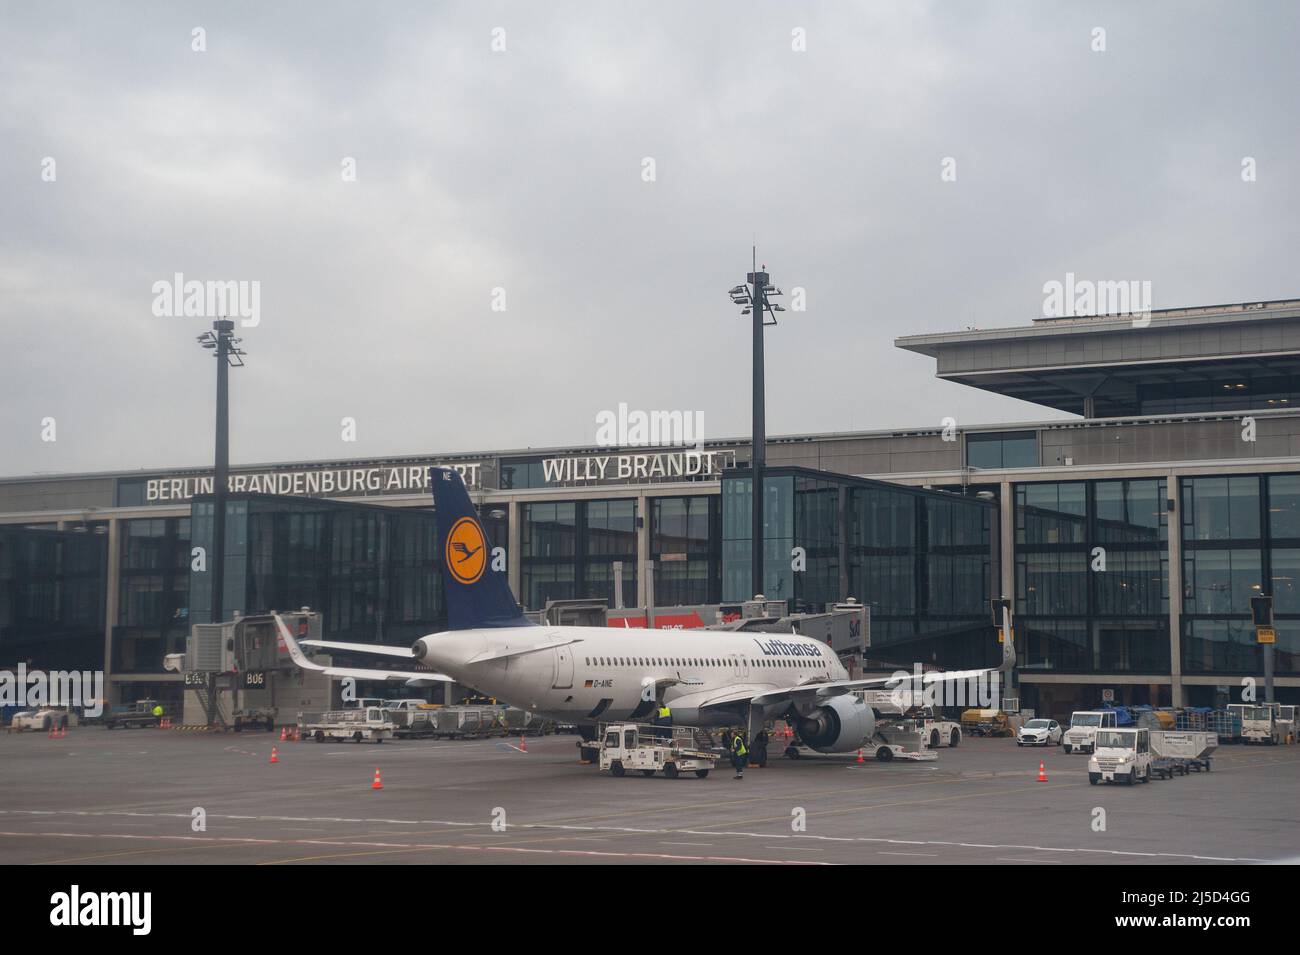 "Dec. 14, 2021, Berlin, Germany, Europe - A Lufthansa Airbus A320 Neo passenger aircraft parks at a gate at Berlin Brandenburg ""Willy Brandt"" Airport. Lufthansa is a member of the Star Alliance aviation alliance, an international network of airlines. [automated translation]" Stock Photo